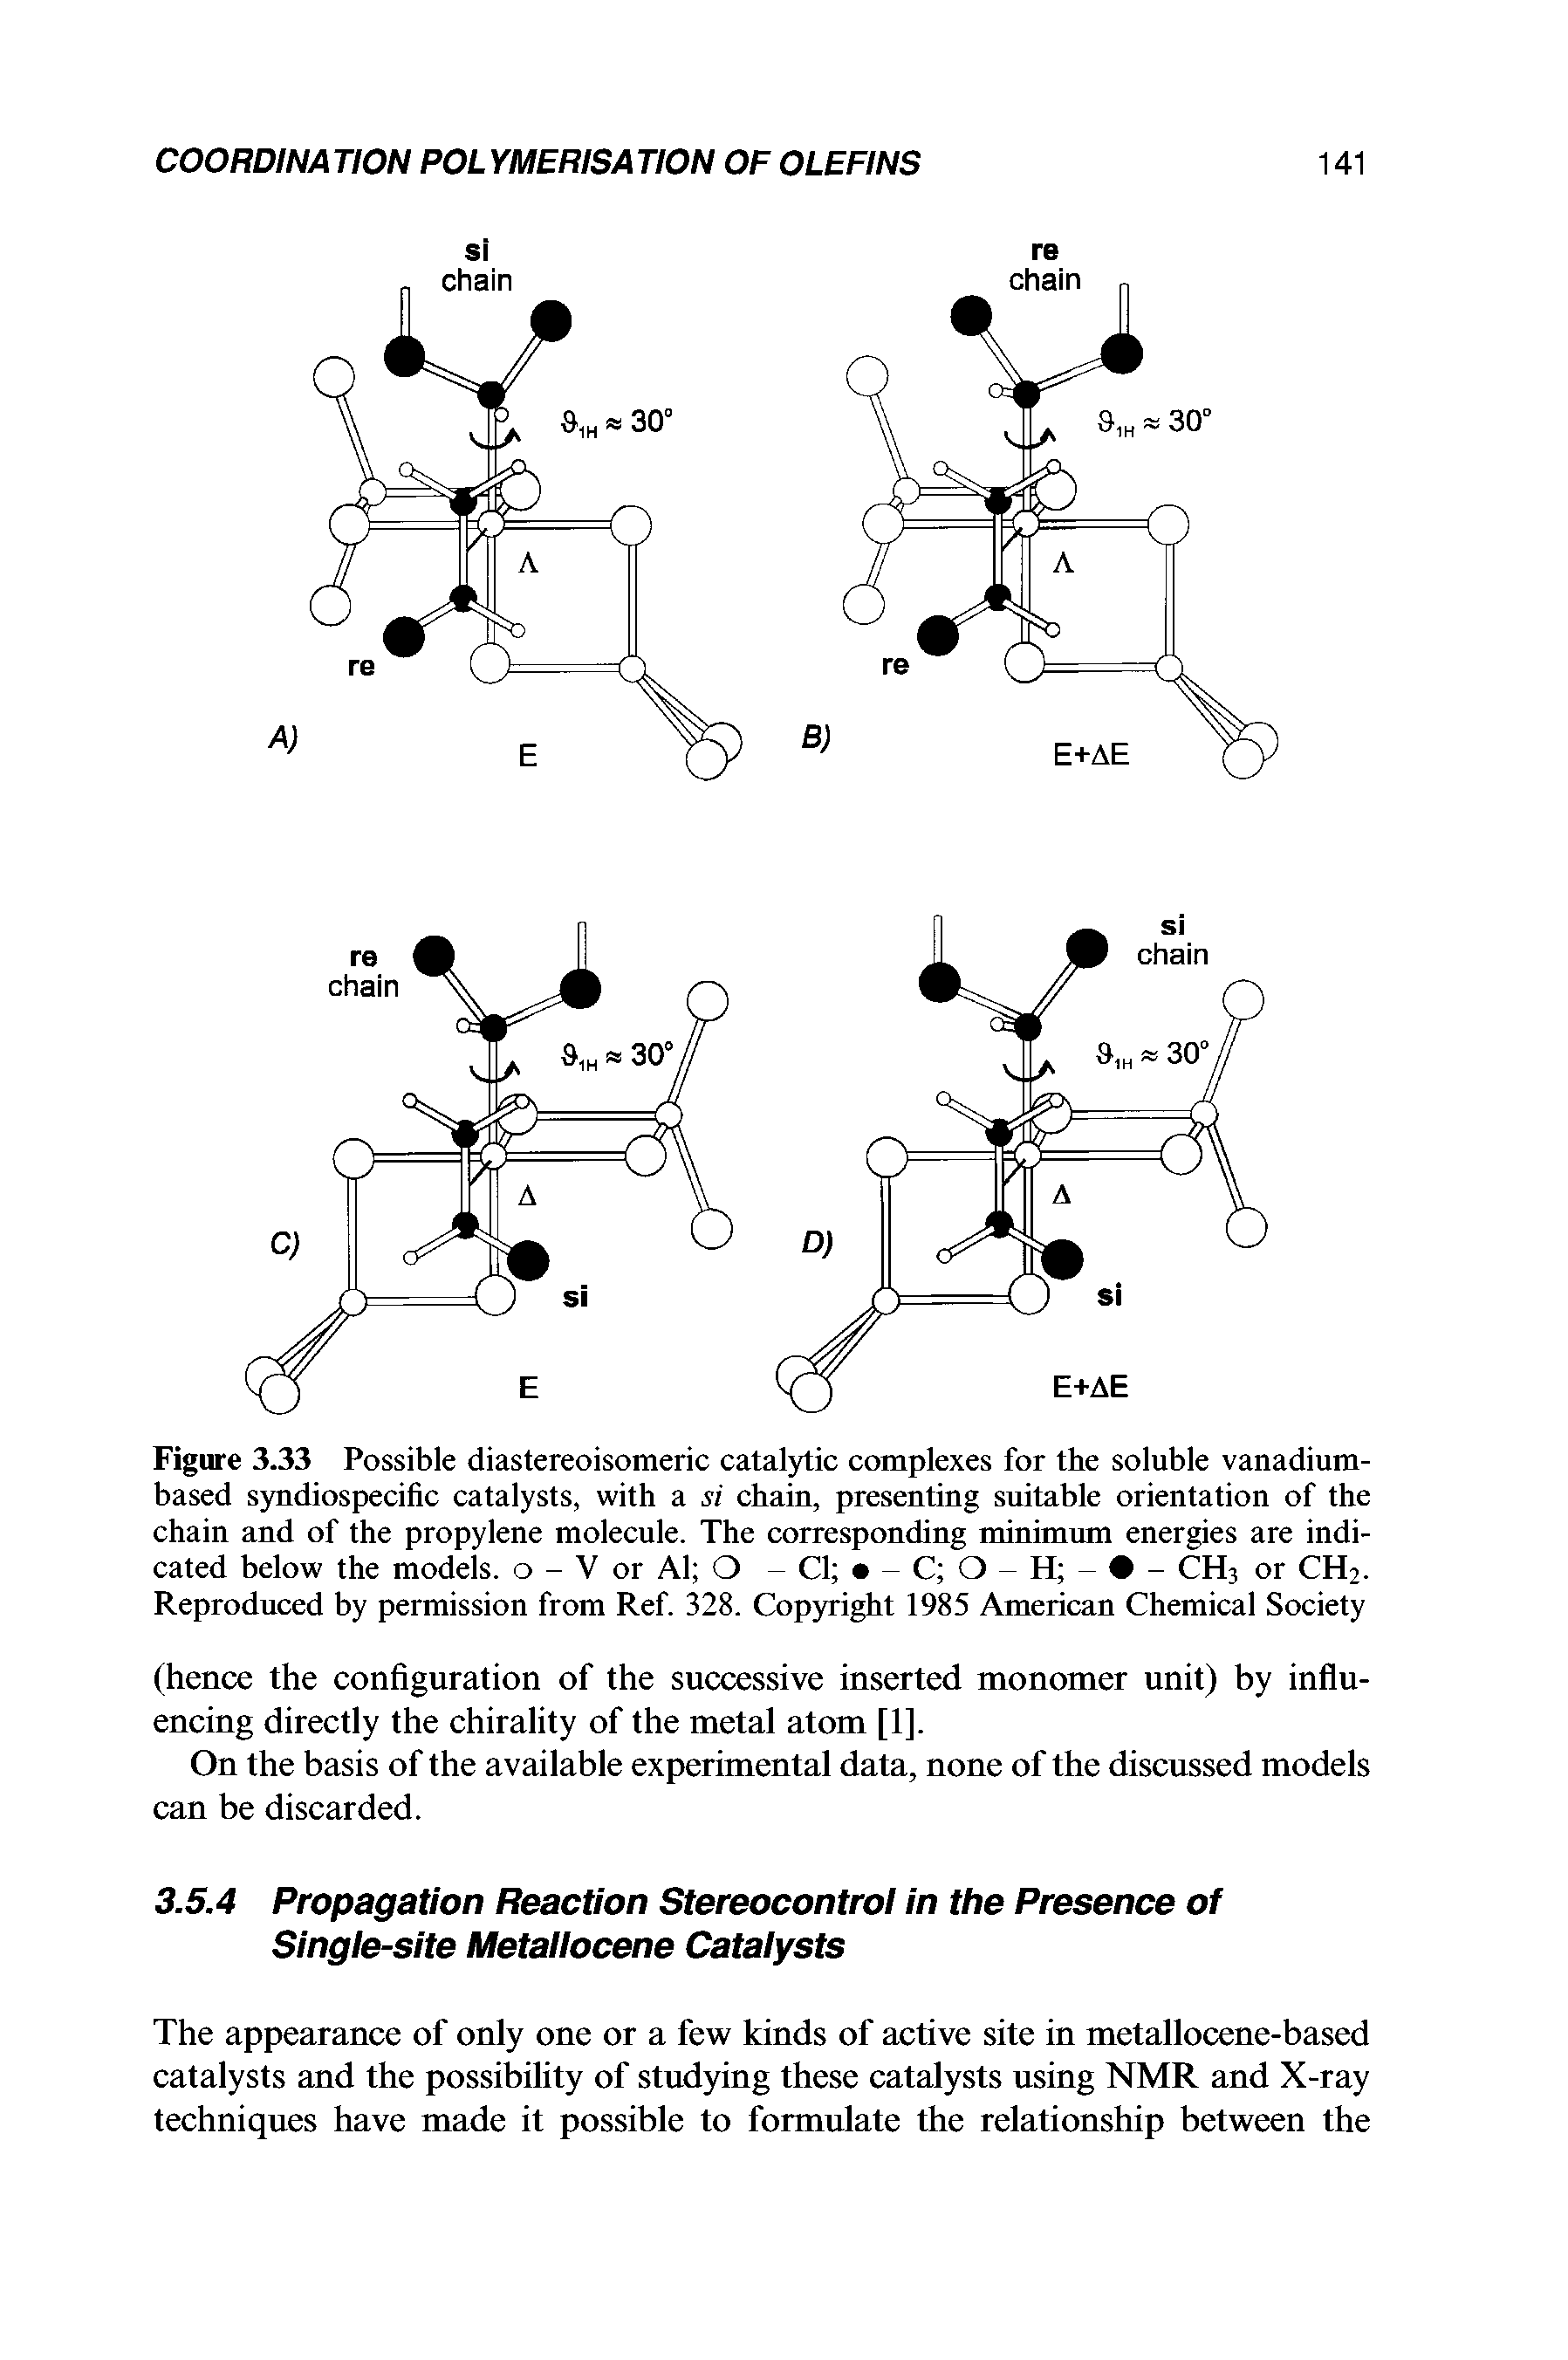 Figure 3.33 Possible diastereoisomeric catalytic complexes for the soluble vanadium-based syndiospecific catalysts, with a si chain, presenting suitable orientation of the chain and of the propylene molecule. The corresponding minimum energies are indicated below the models, o - V or Al O Cl C O H - CH3 or CH2. Reproduced by permission from Ref. 328. Copyright 1985 American Chemical Society...